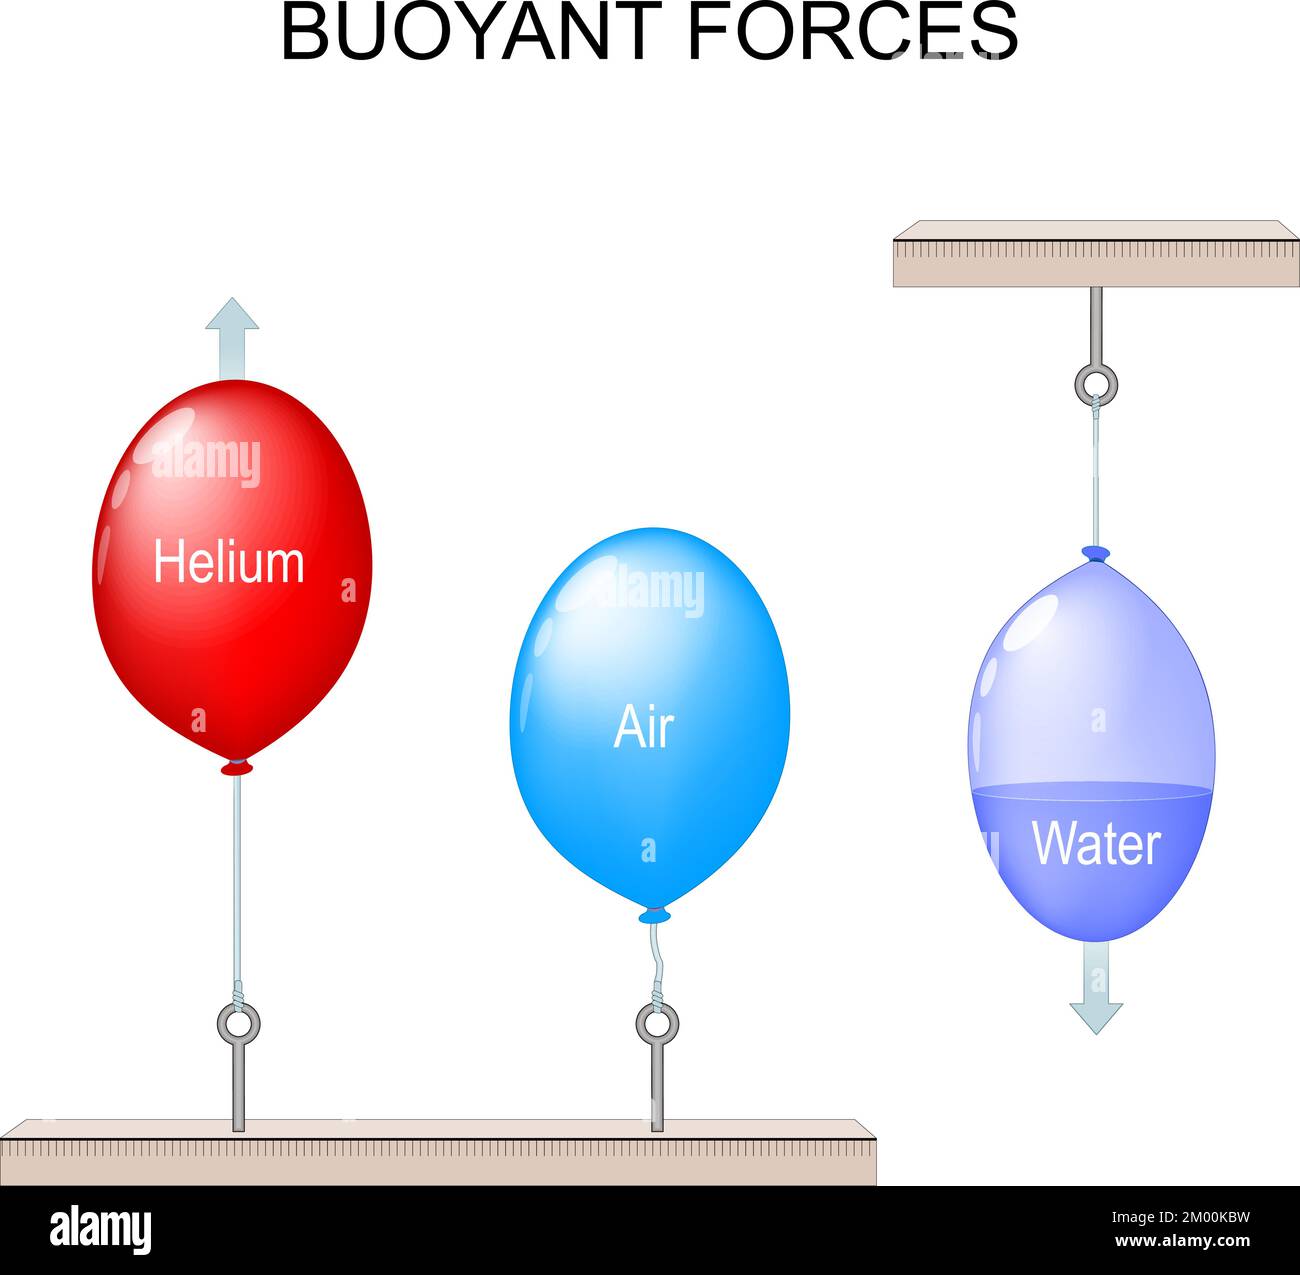 Buoyant Force. scientific experiment with balloons. The forces at work in buoyancy. One Red balloon with gas Helium, and two blue balloon with air and Stock Vector